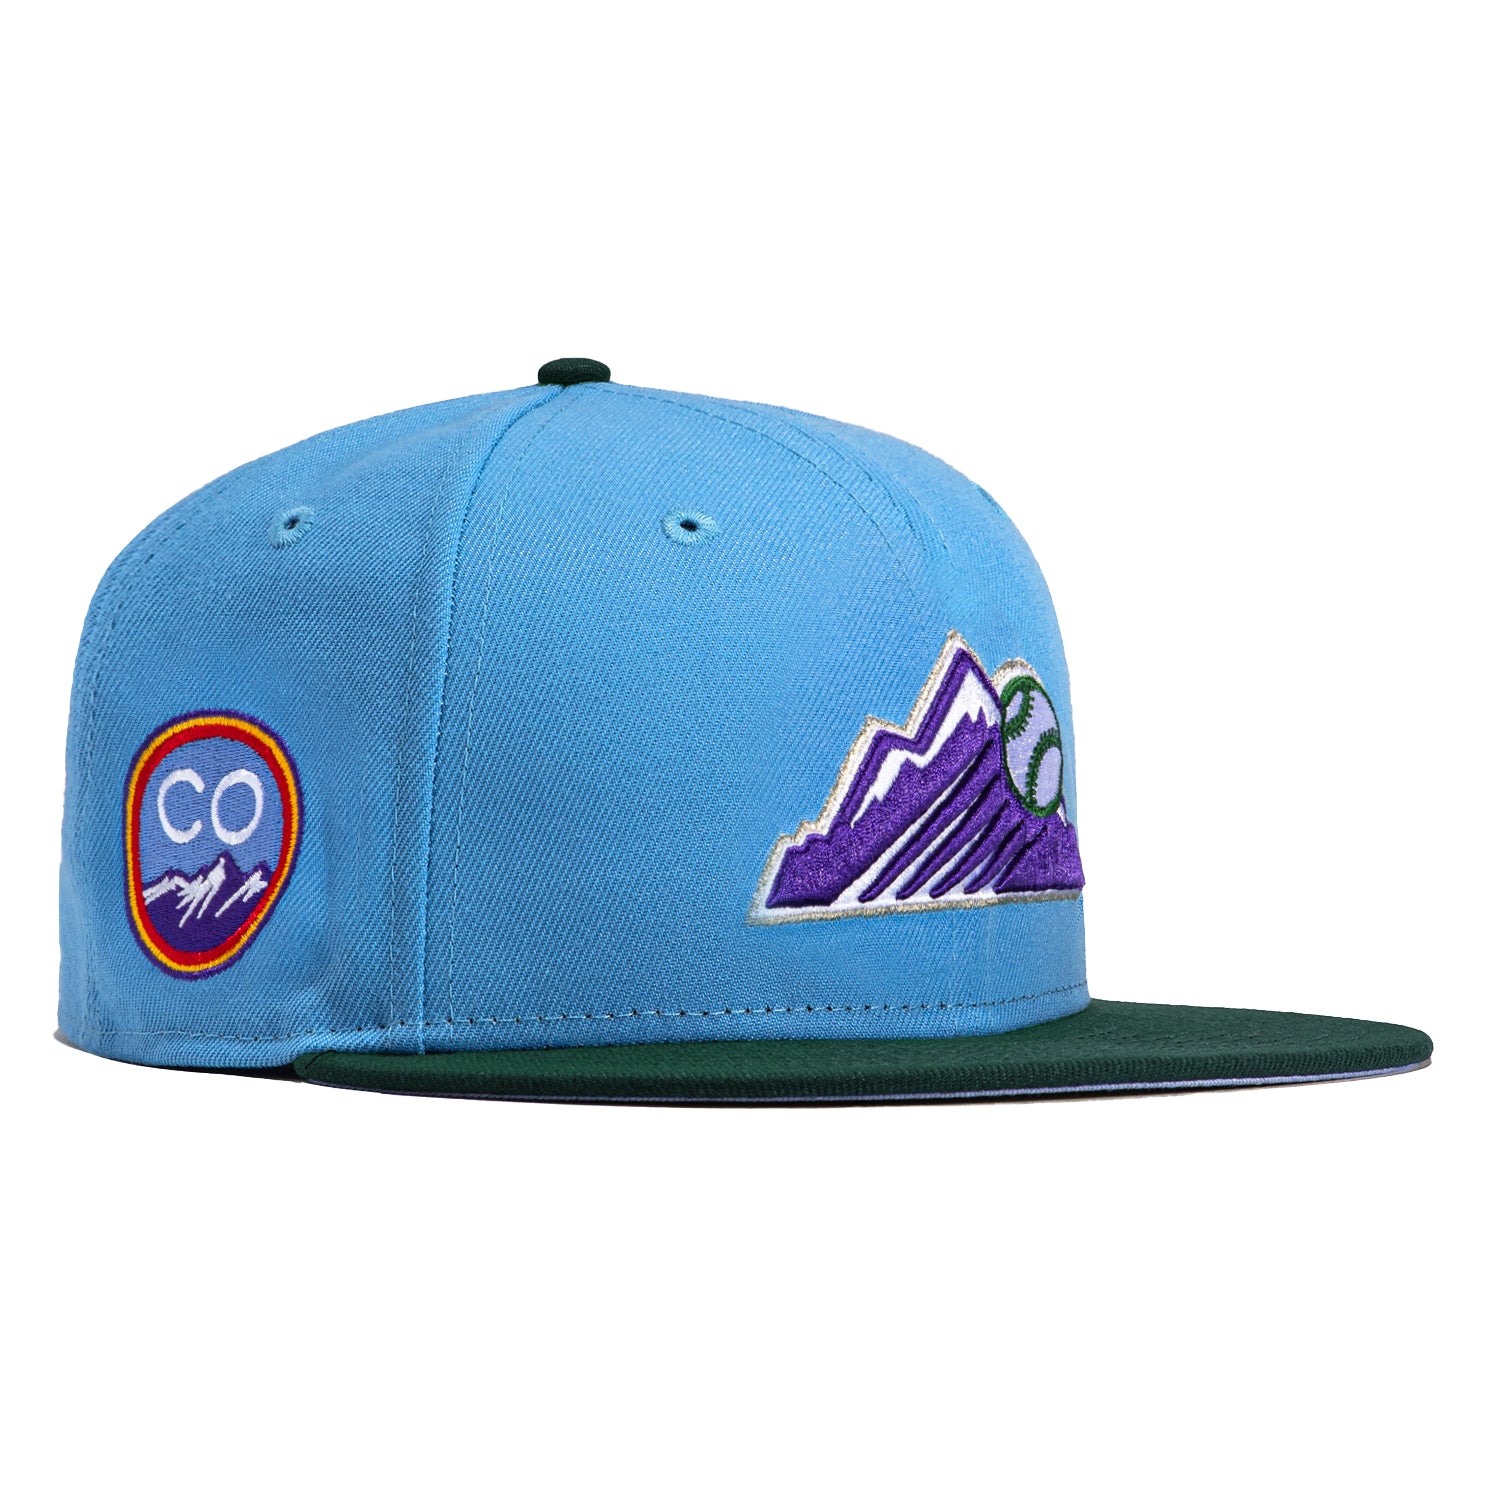 rockies connect hat